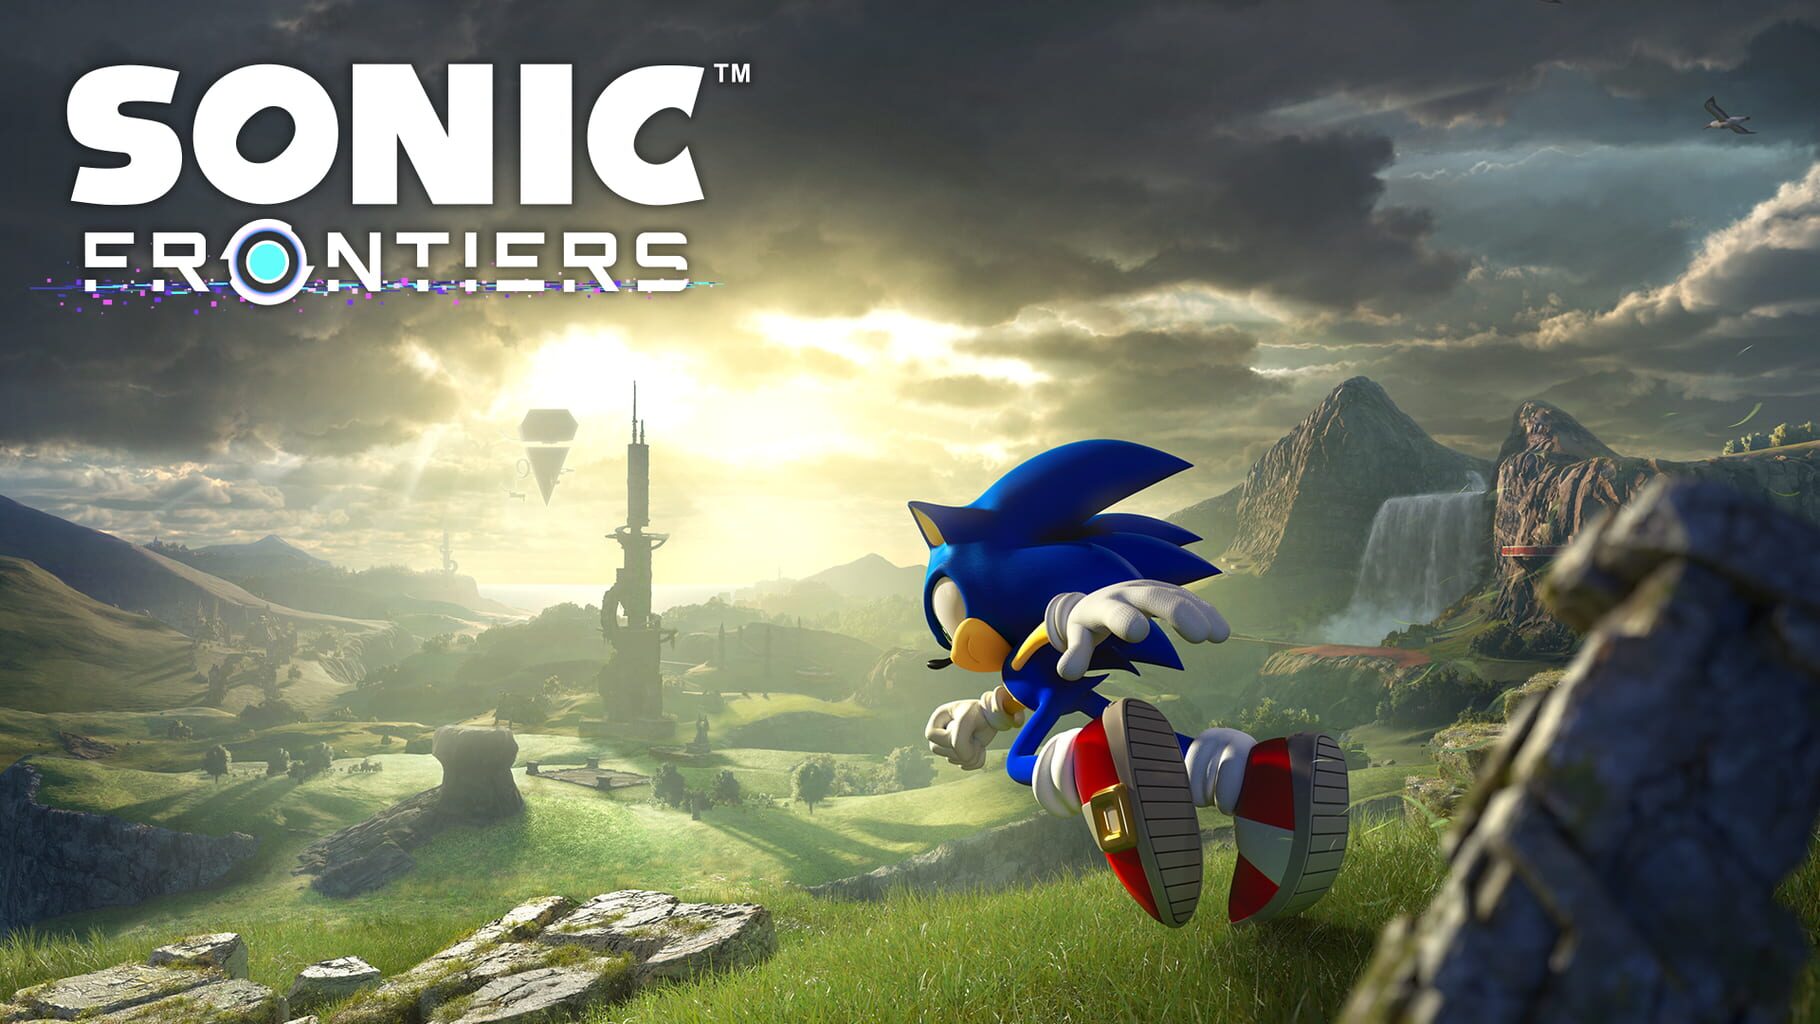 Artwork for Sonic Frontiers